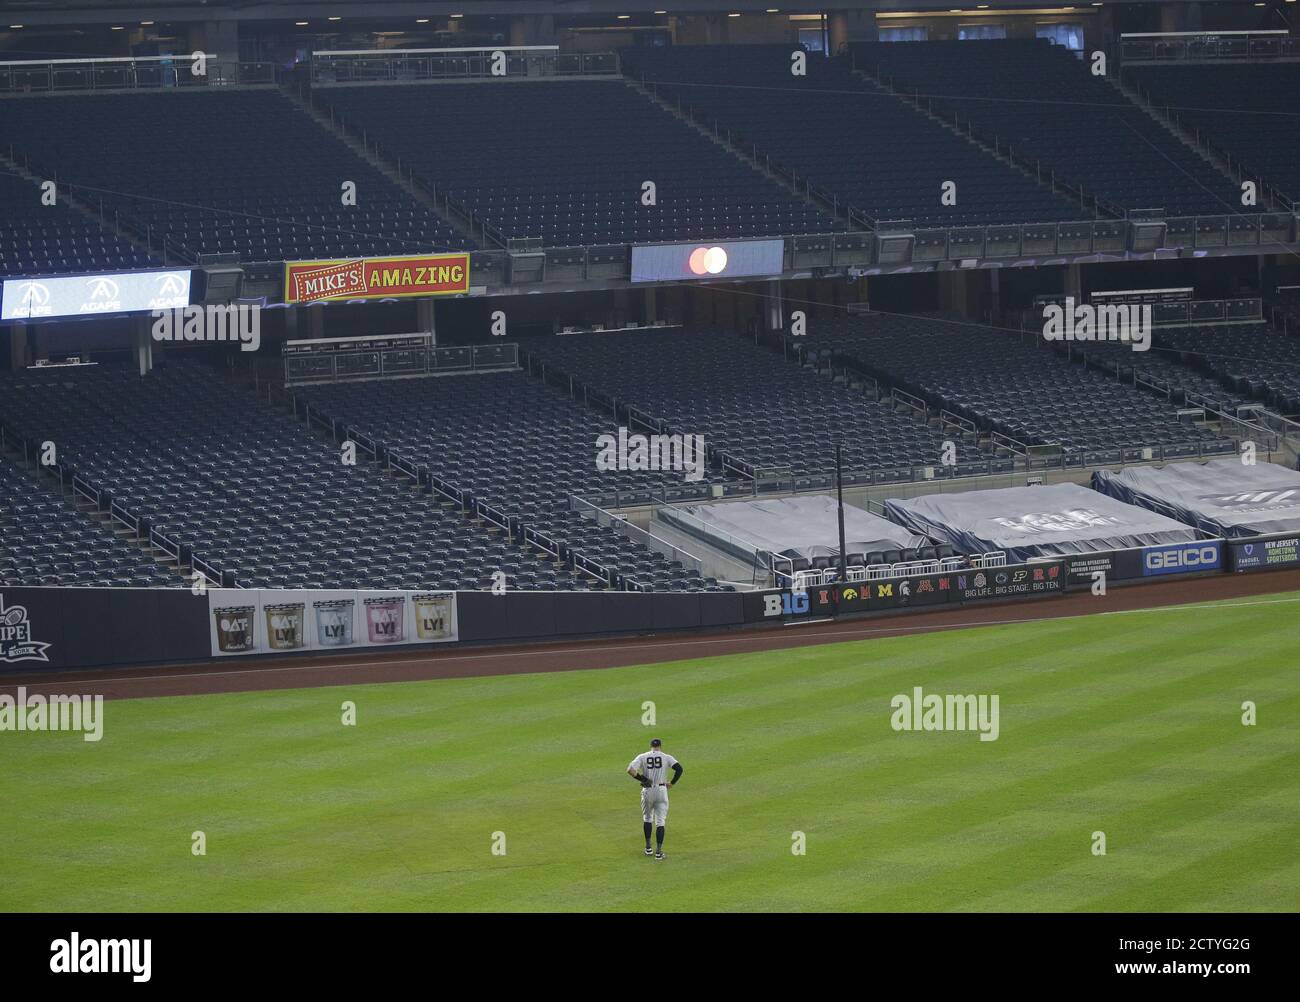 Behind home plate at the new Yankee Stadium during Opening Week, April 2009  Stock Photo - Alamy